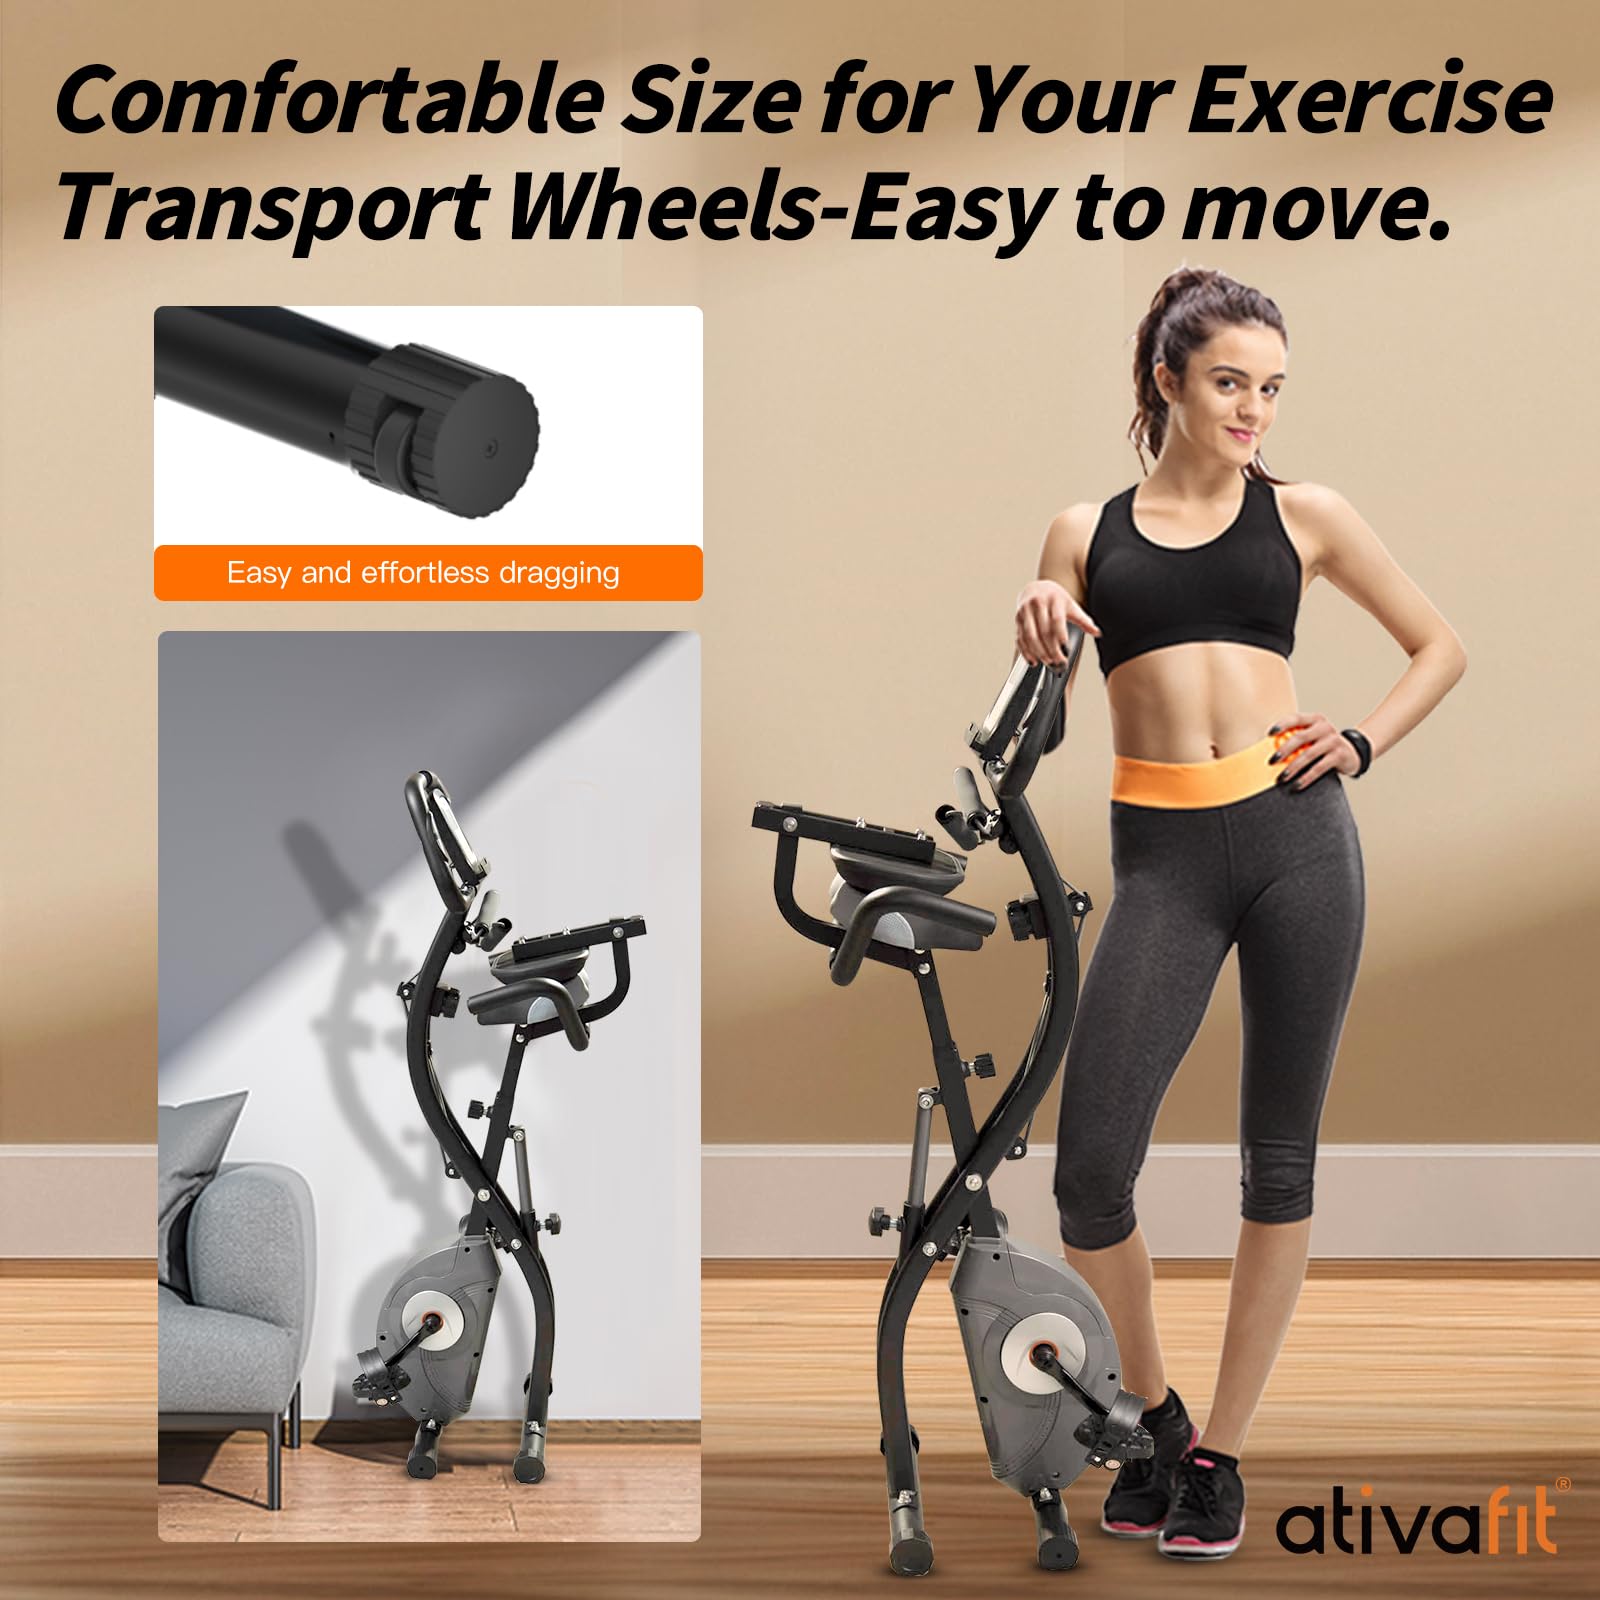 ATIVAFIT Exercise Bike Foldable Fitness Indoor Stationary Bike Magnetic 3 in 1 Upright Recumbent Exercise Bike for Home Workout (gray)